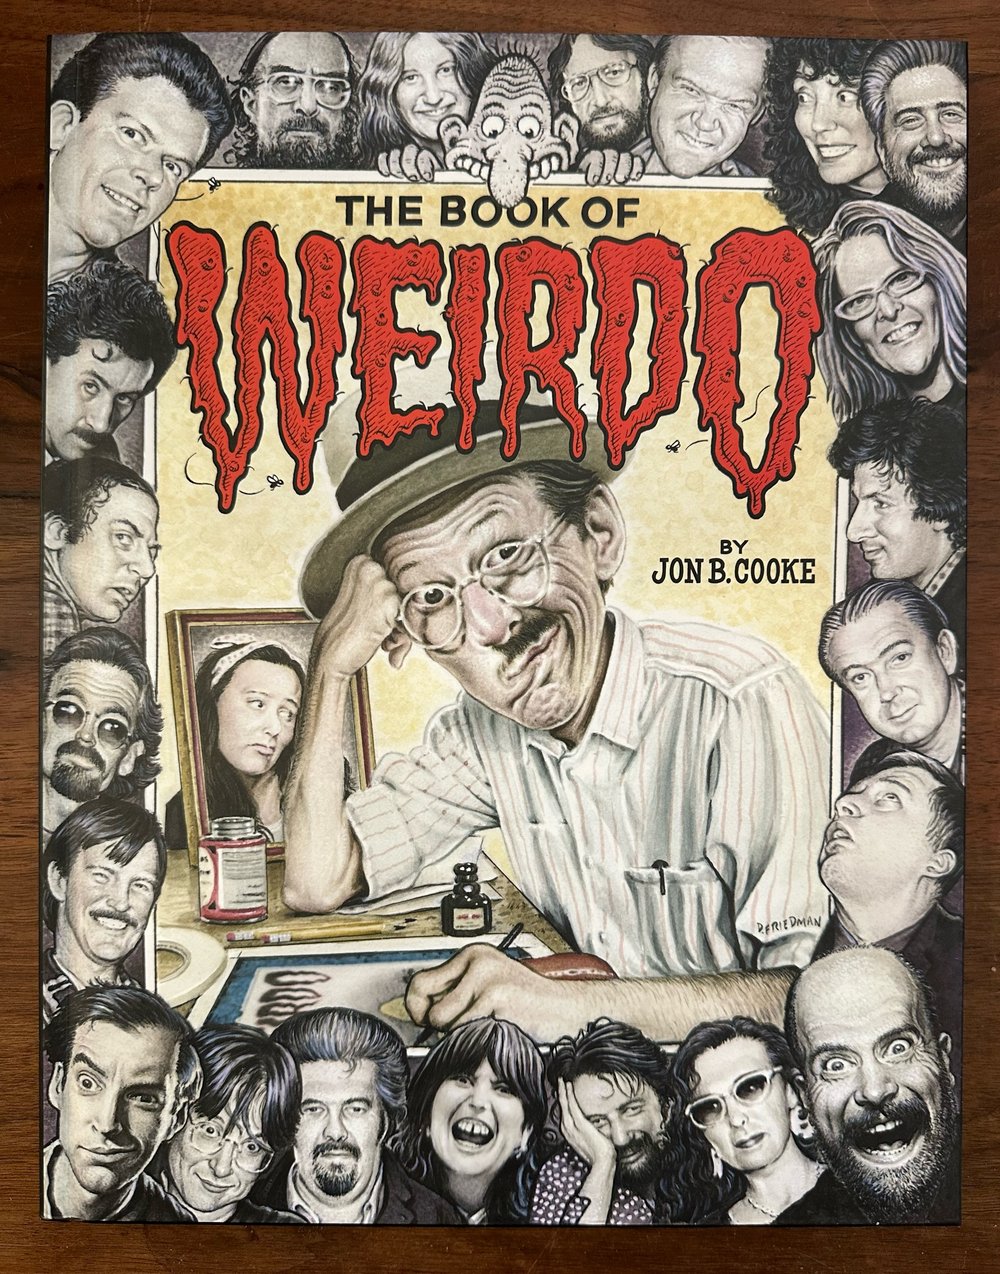 The Book of Weirdo, by Jon B. Cooke, illustrated by Drew Friedman